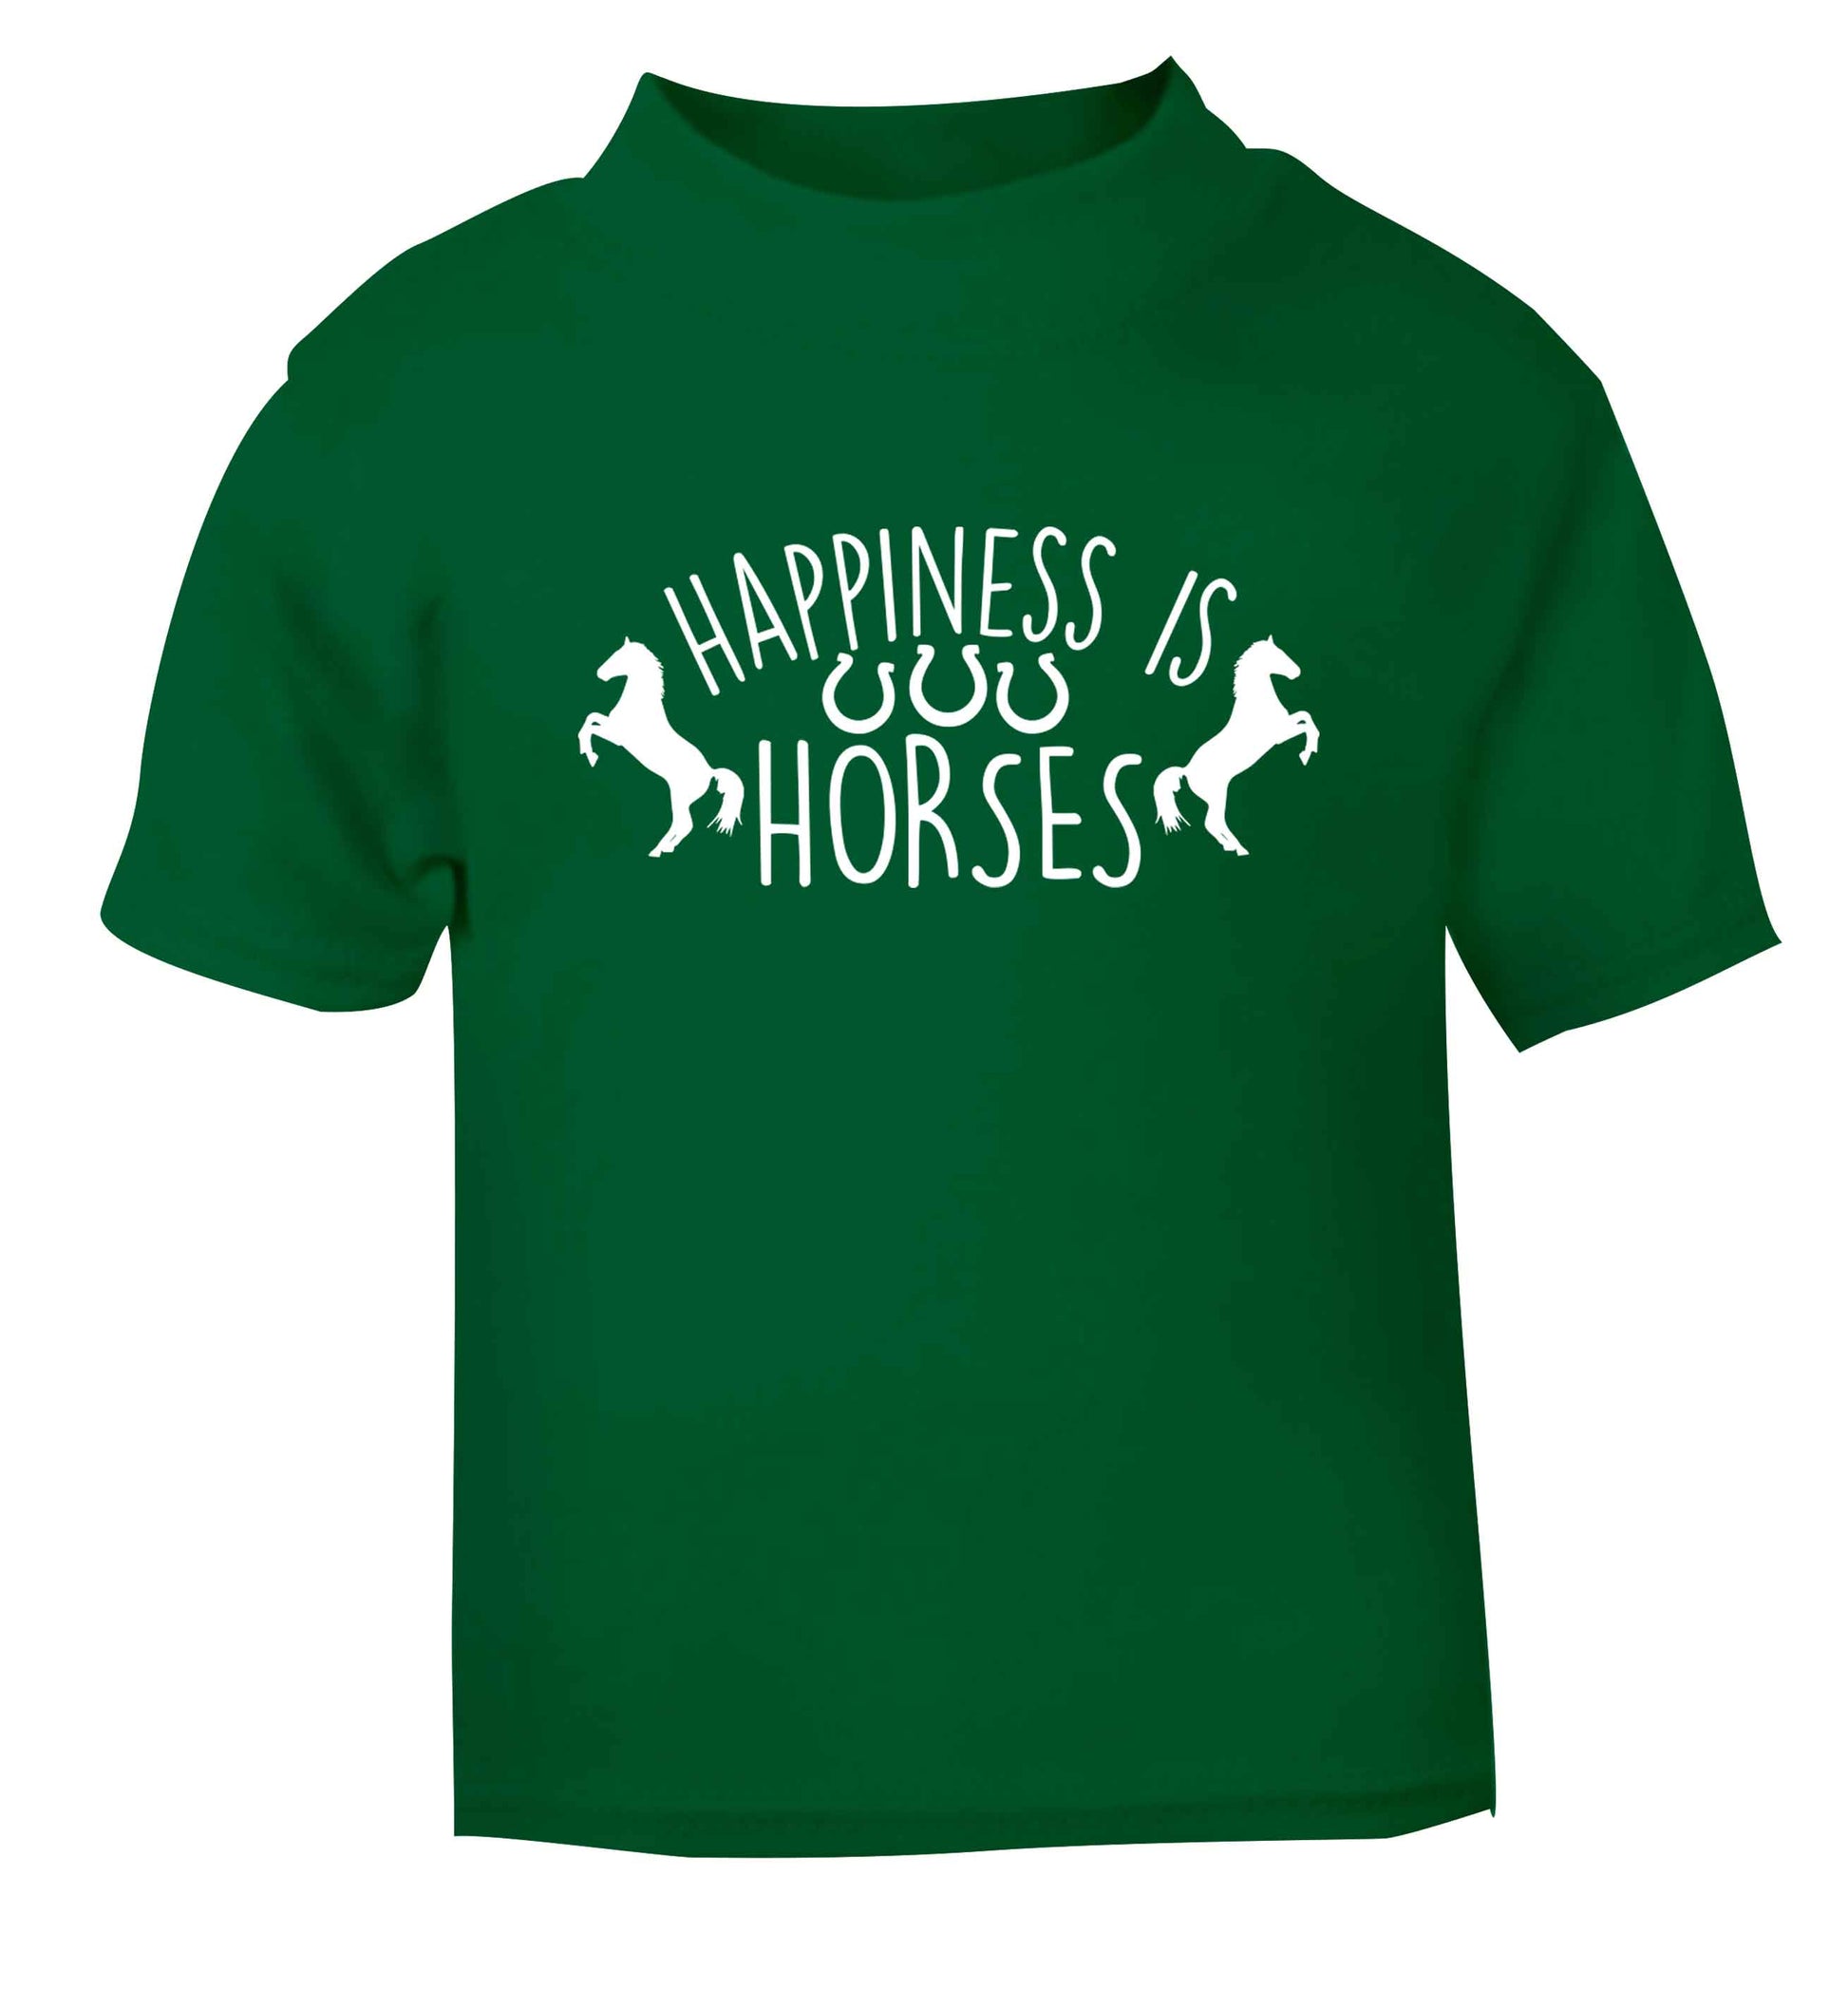 Happiness is horses green baby toddler Tshirt 2 Years